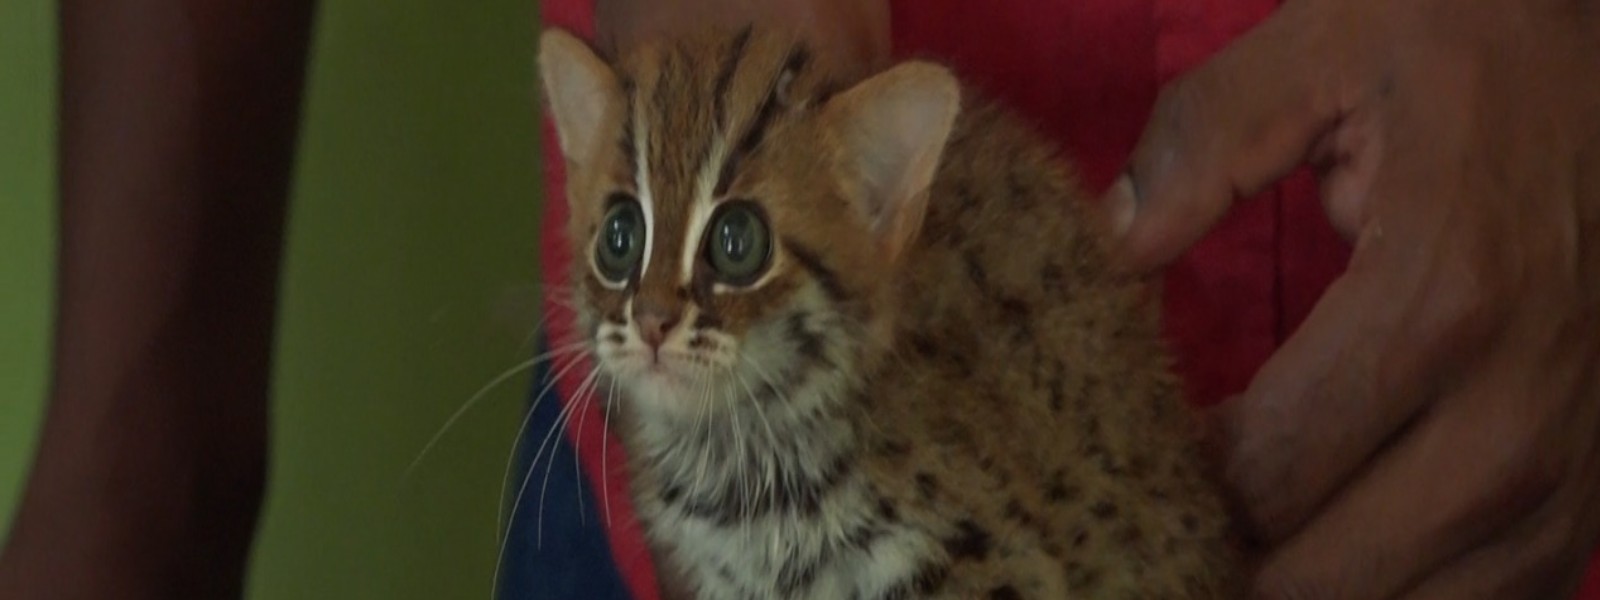 Fishing Cat saved from being sold